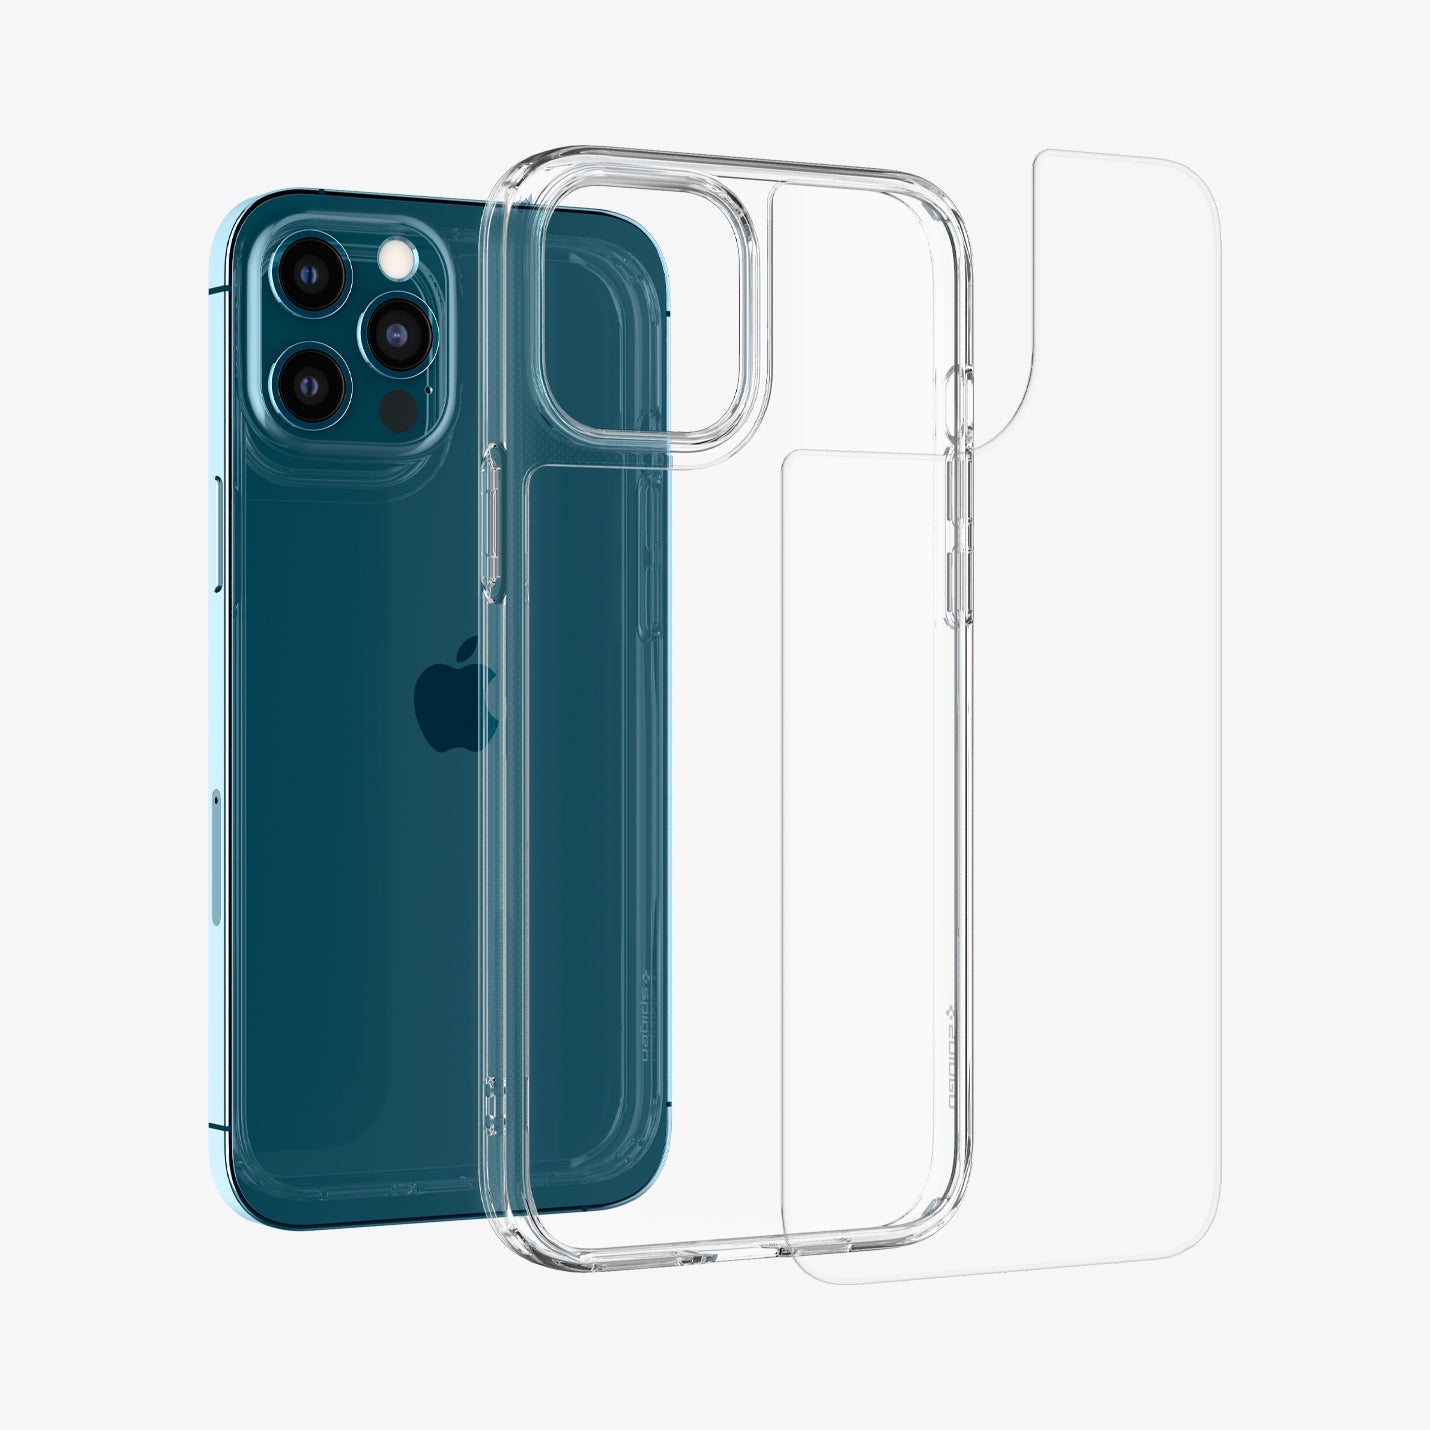 ACS01621 - iPhone 12 Pro Max Case Quartz Hybrid in crystal clear showing the multiple layers of case hovering away from device